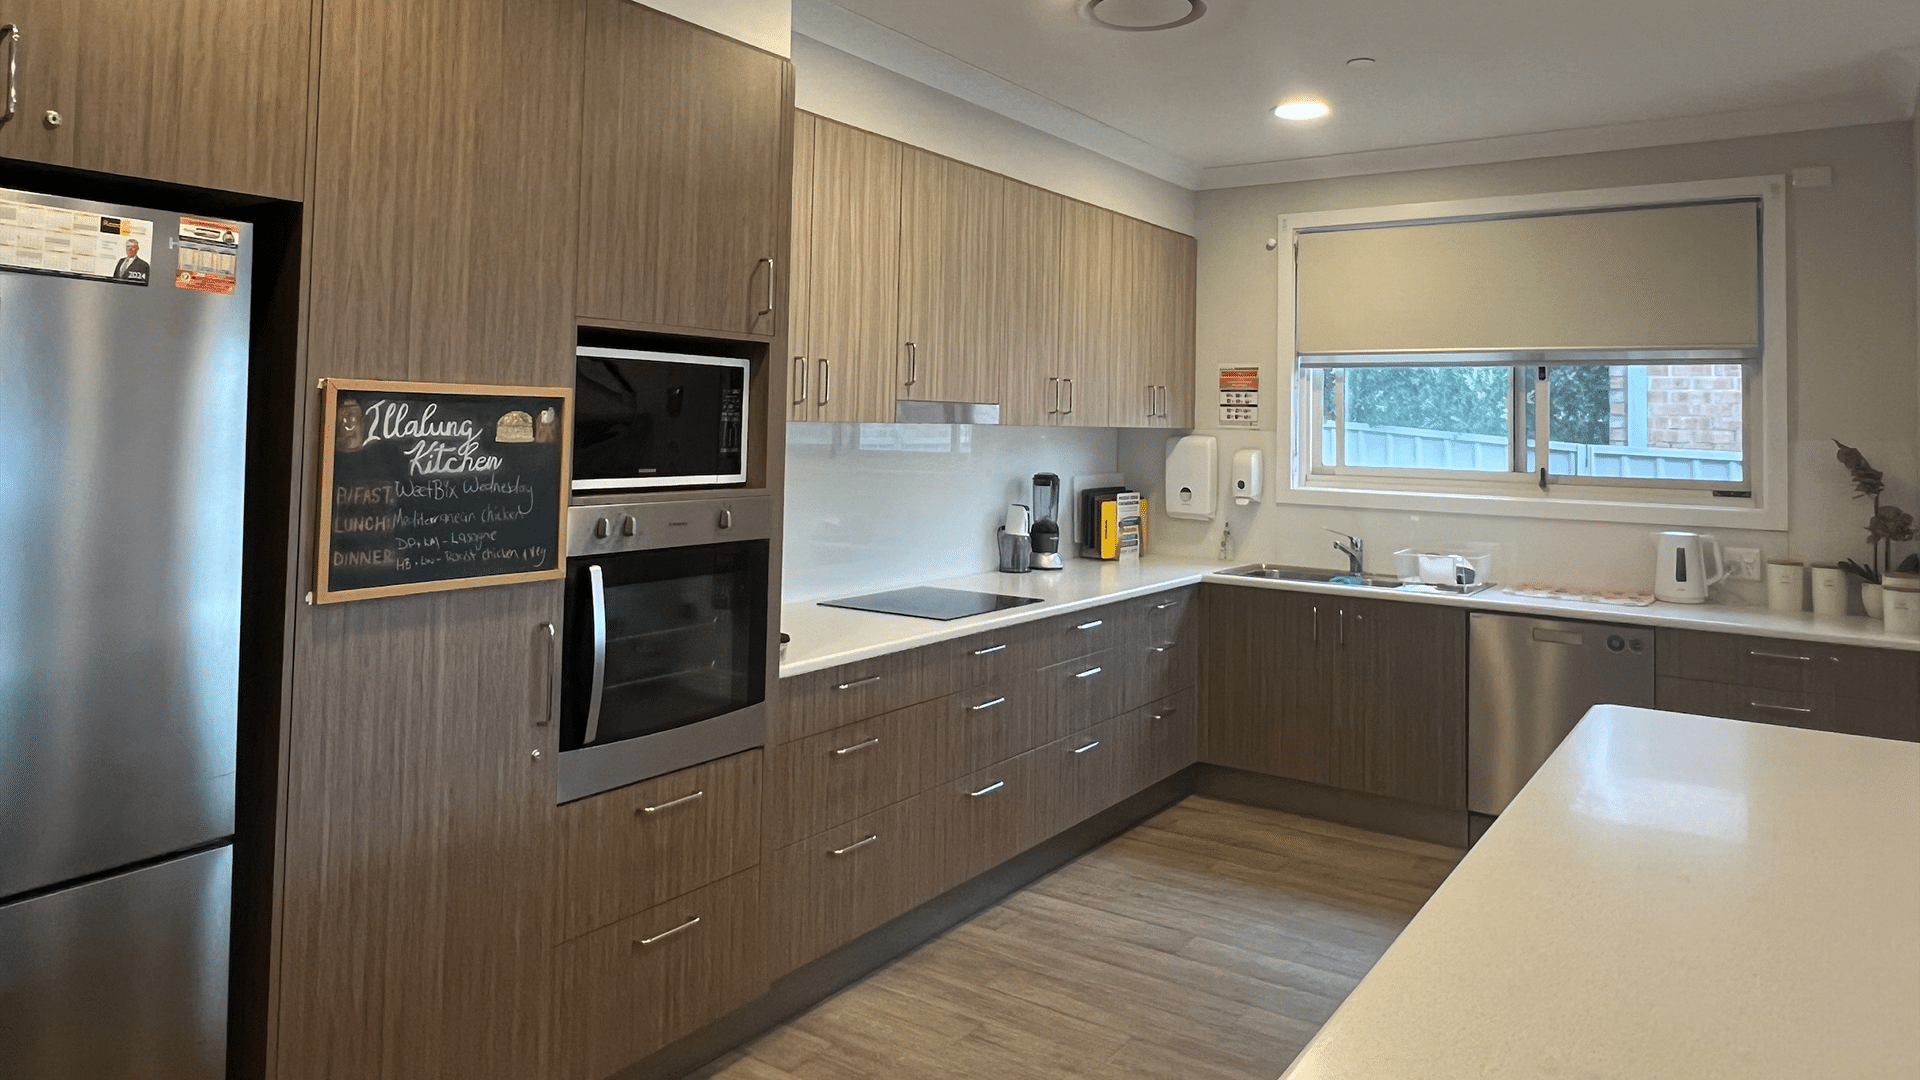 View of the kitchen with a window, brown cabinetry and stainless steel kitchen appliances